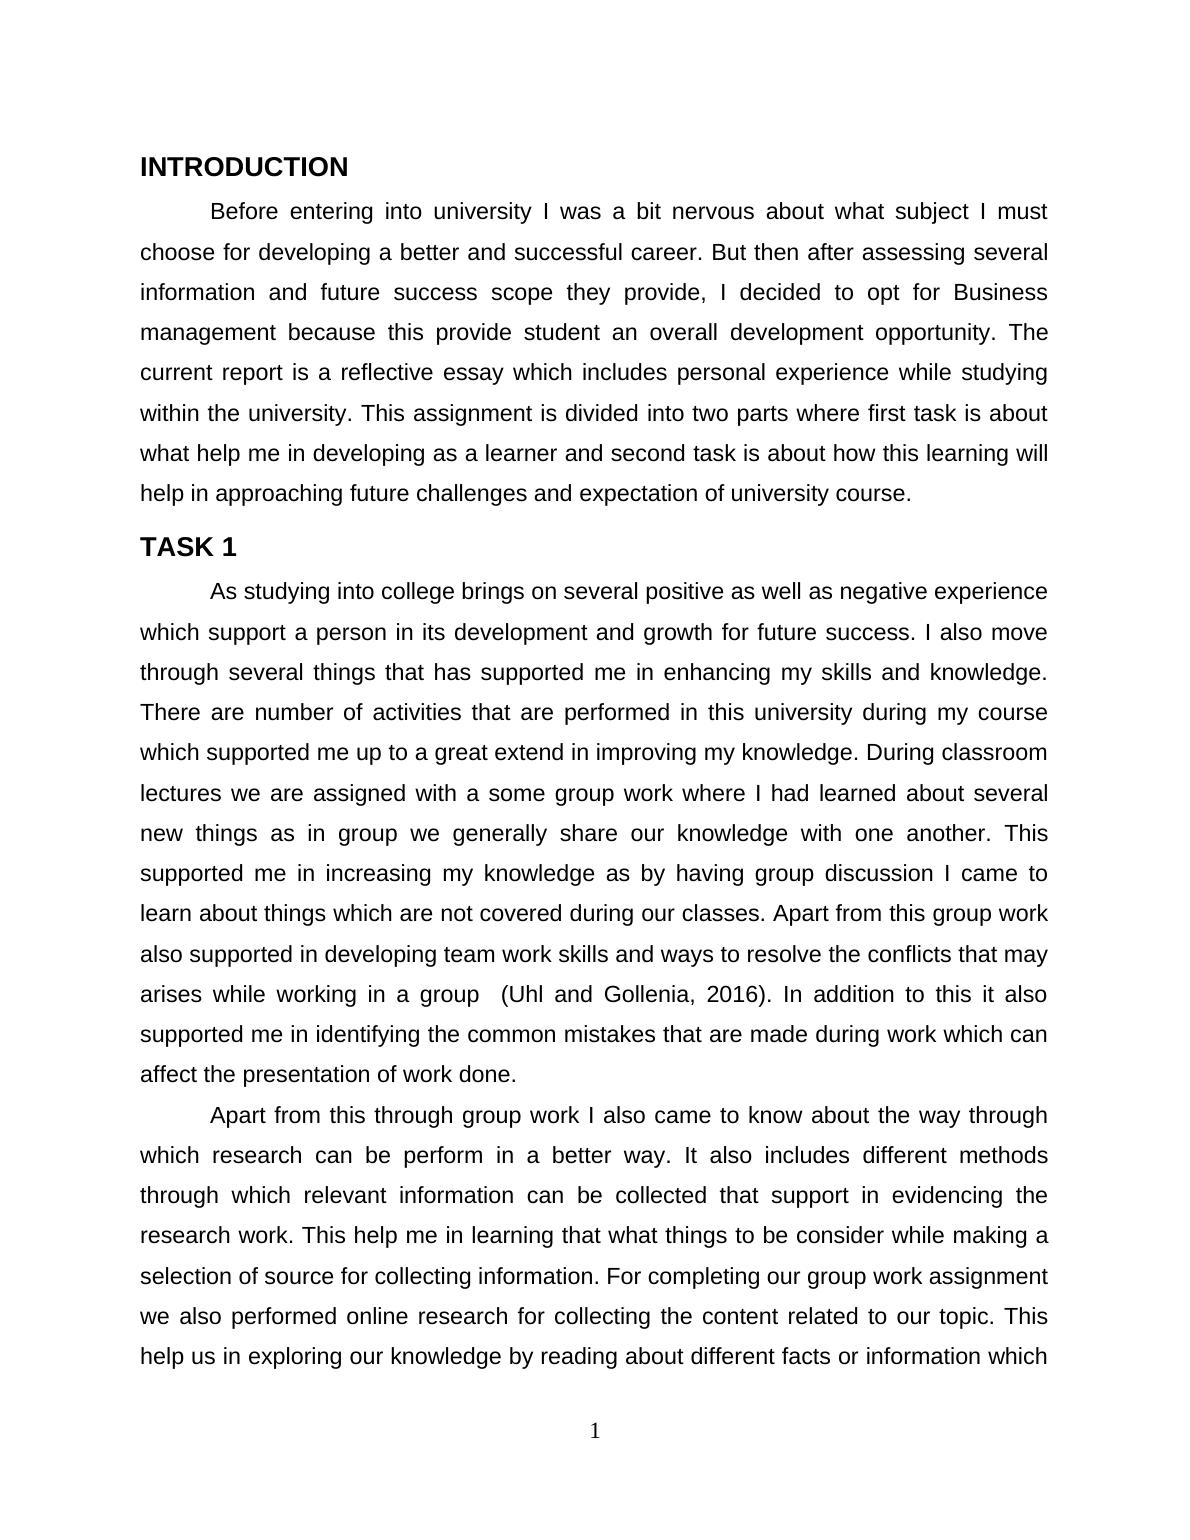 Reflective Essay - Personal Experience Studying in University_3